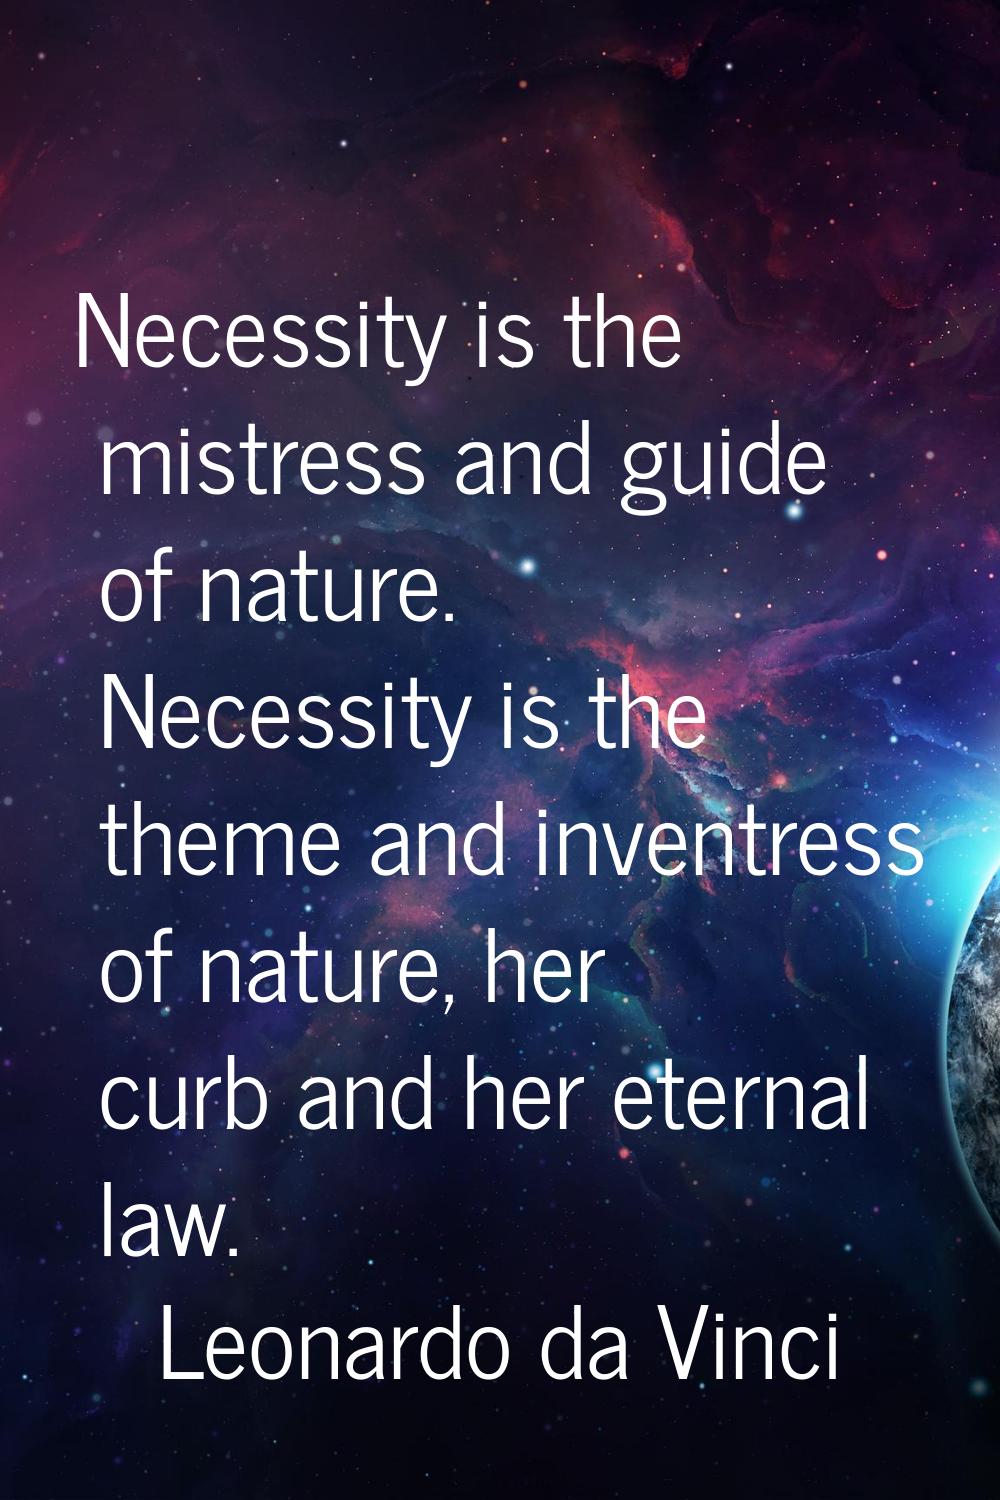 Necessity is the mistress and guide of nature. Necessity is the theme and inventress of nature, her